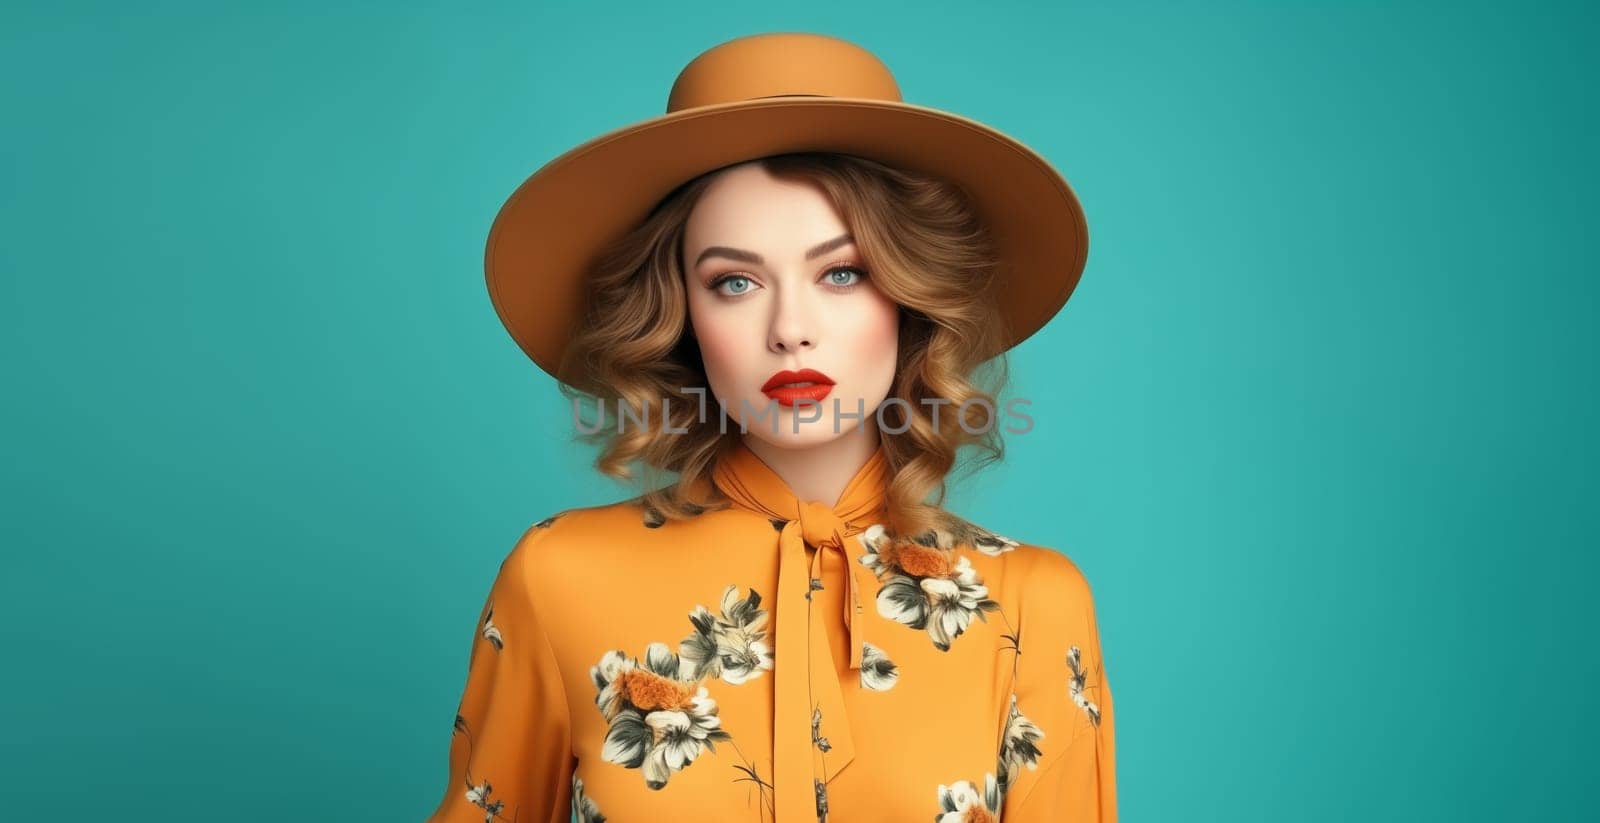 Portrait of beautiful elegant stylish woman in round hat, lady in retro style posing on color background